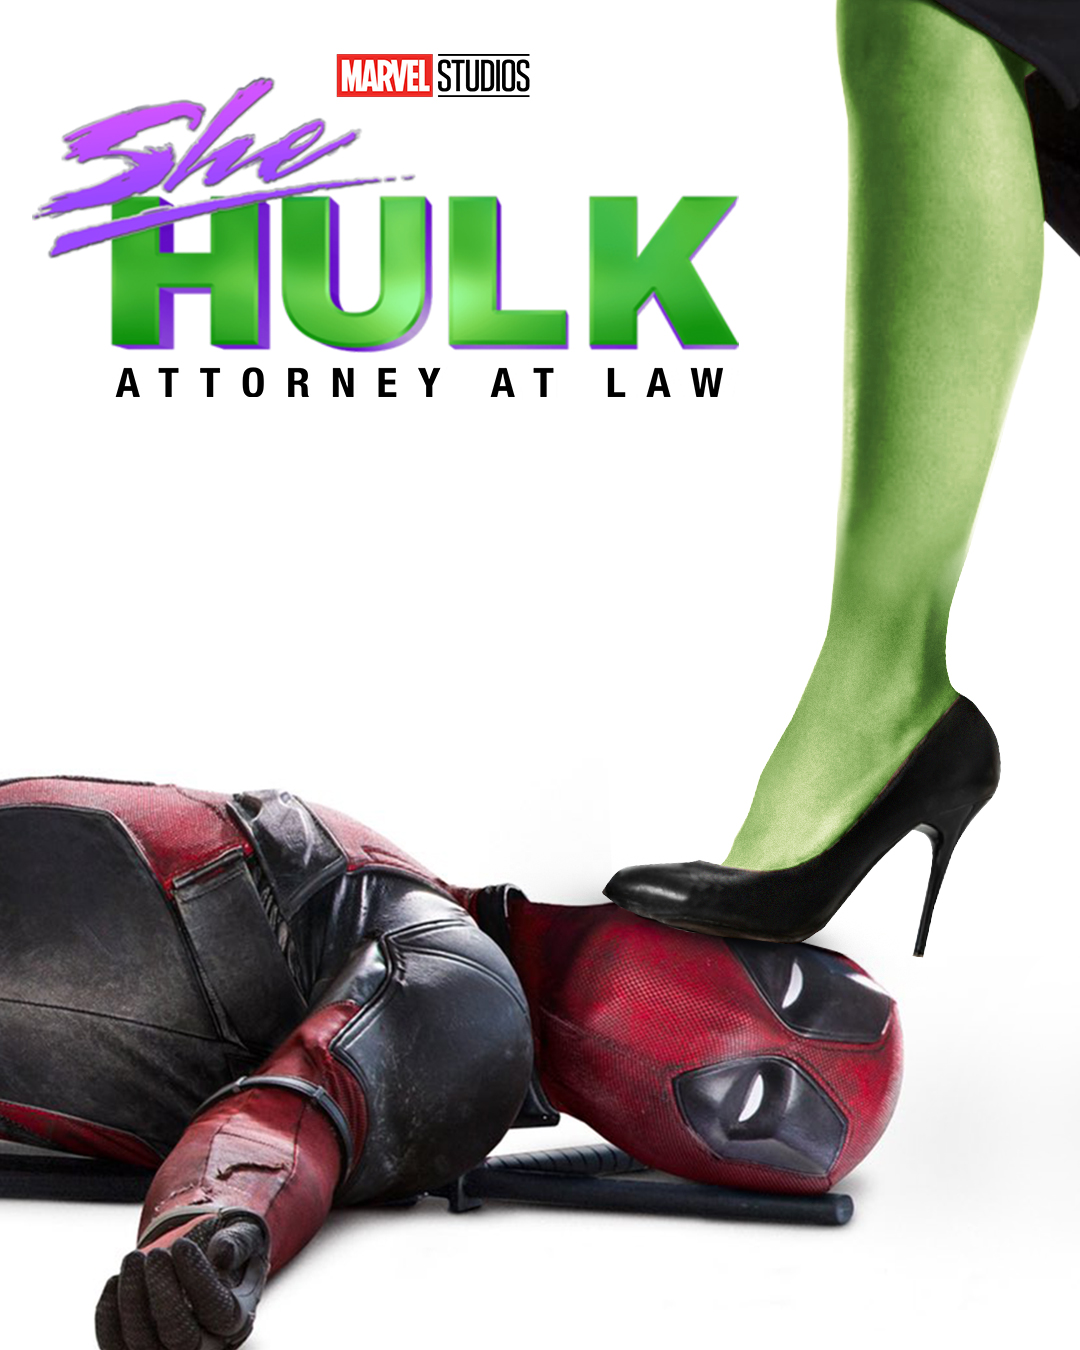 She Hulk attorney at law